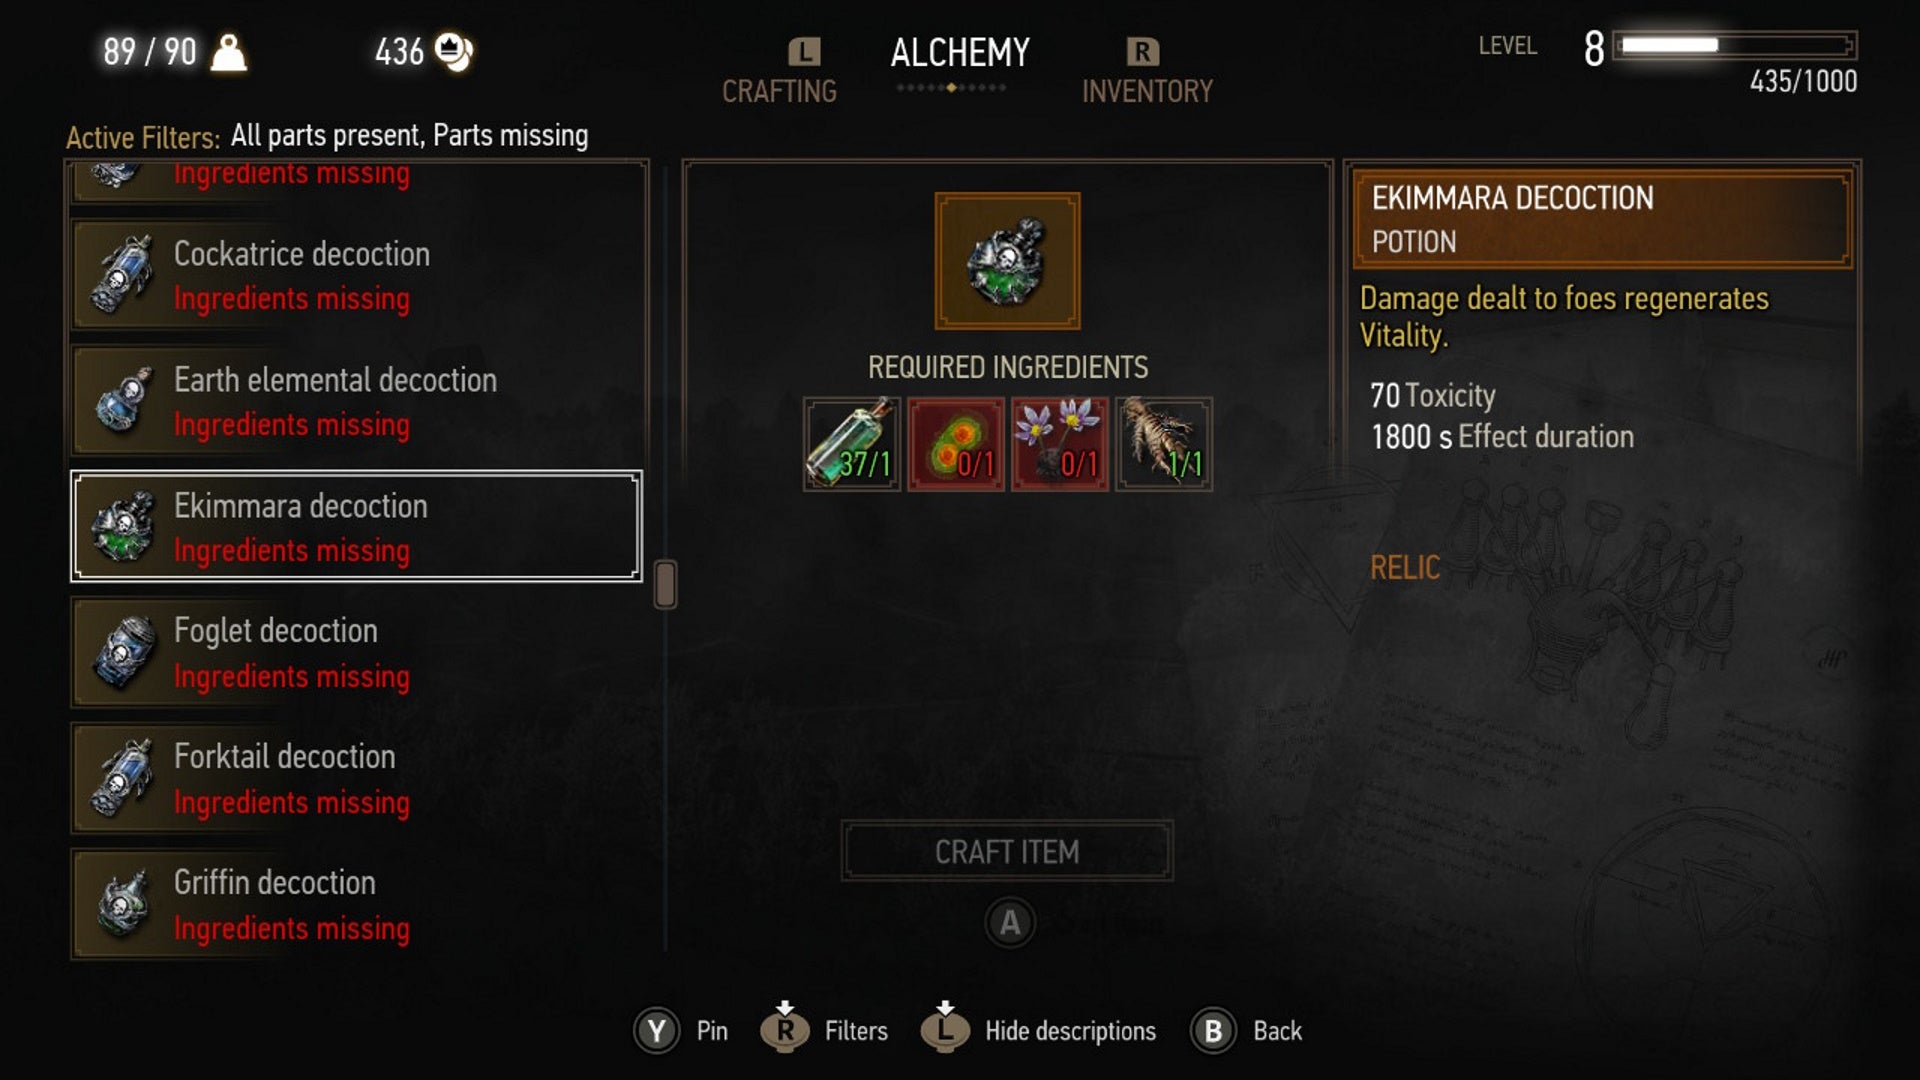 Witcher 3 alchemy: A menu image is shown, with the cursor highlighting the Ekimmara Decoction, an item used to drain health from enemies while Geralt attacks them